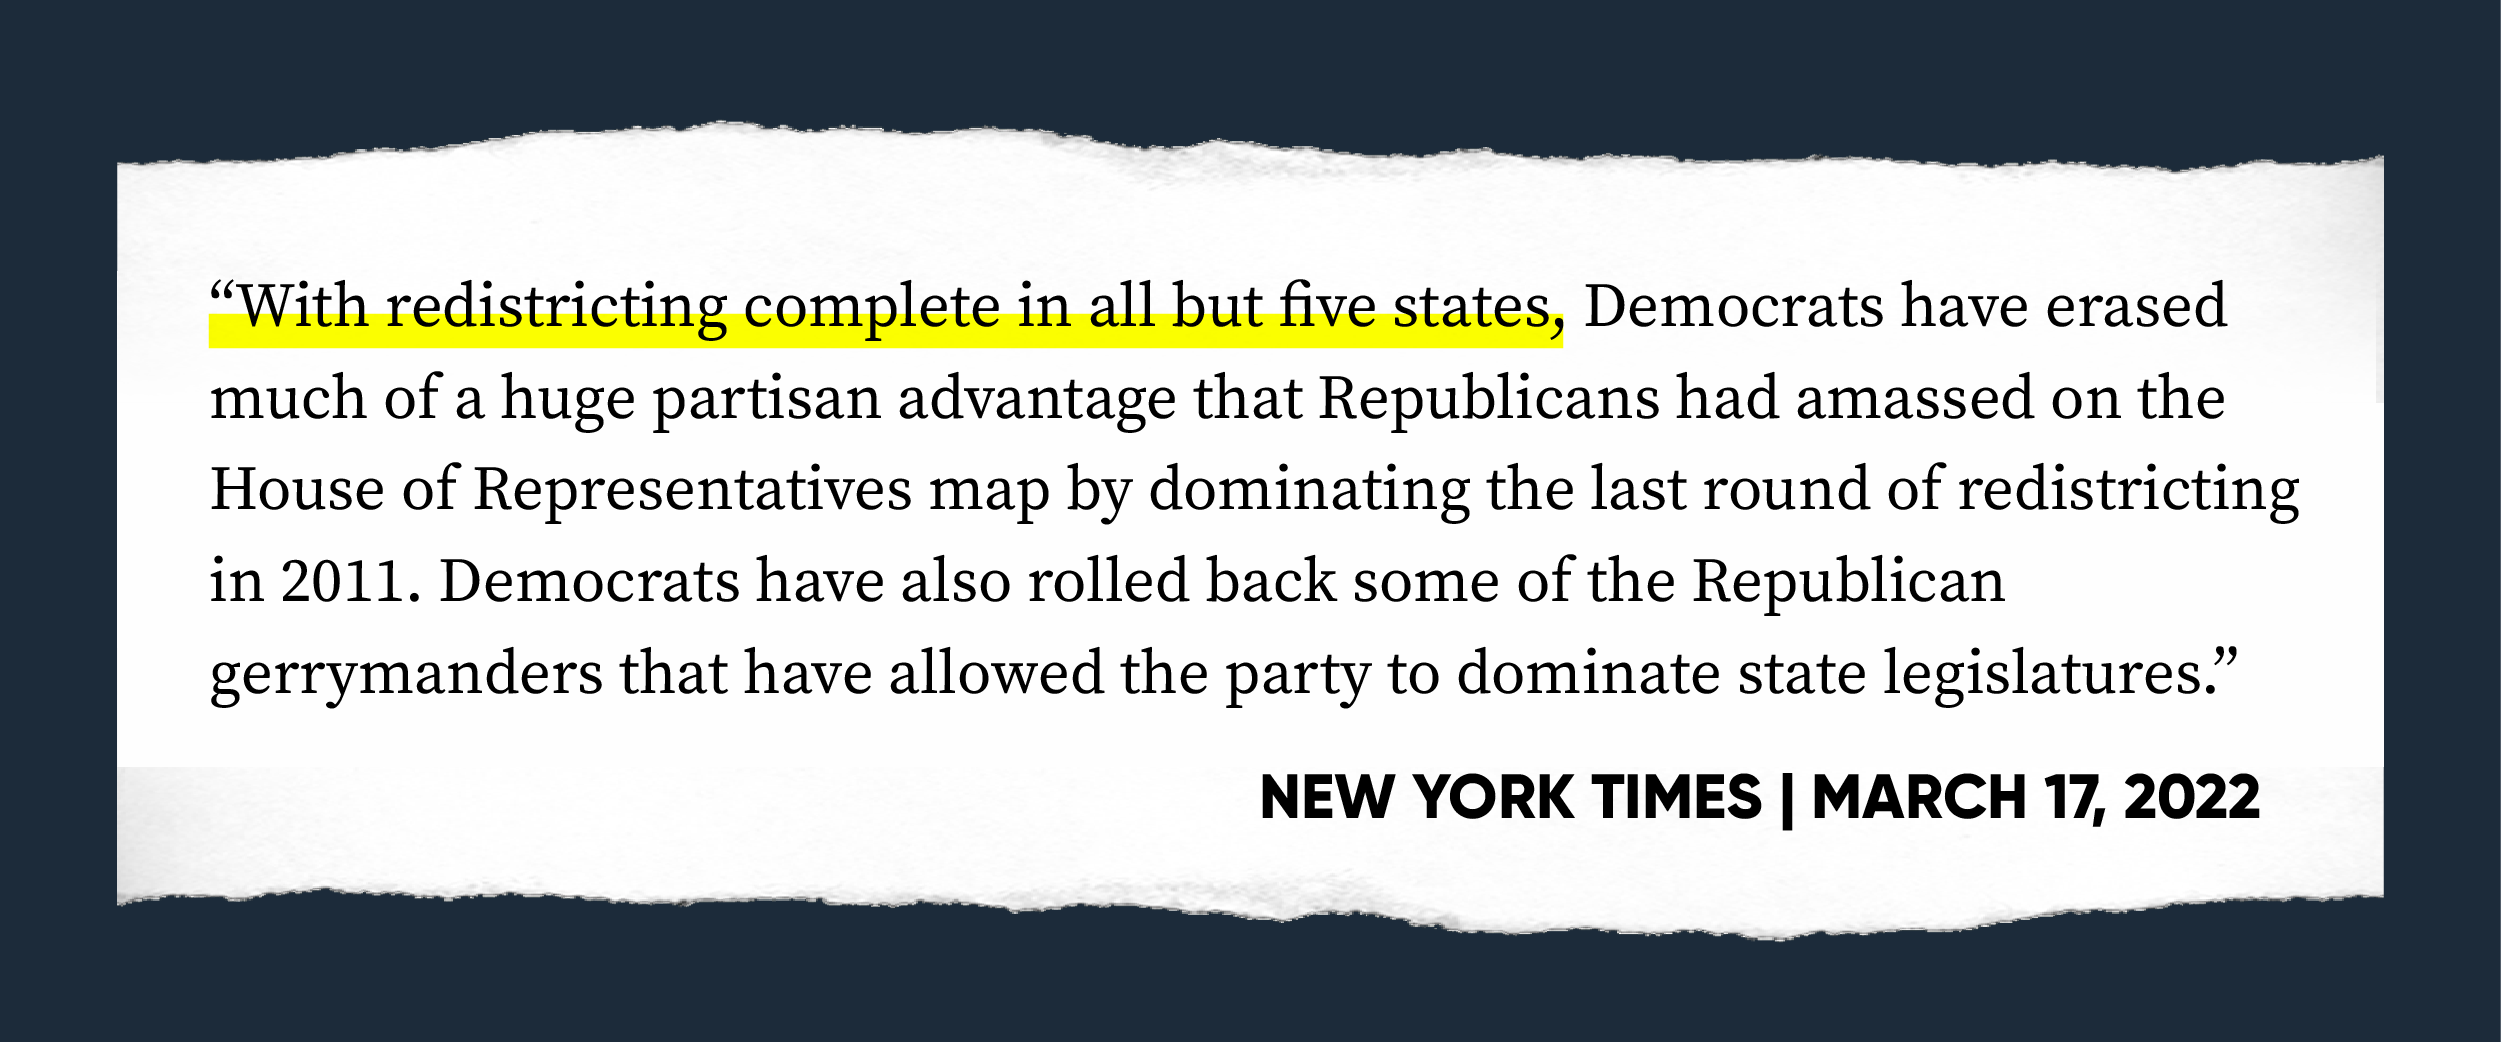 “With redistricting complete in all but five states, Democrats have erased much of a huge partisan advantage that Republicans had amassed on the House of Representatives map by dominating the last round of redistricting in 2011. Democrats have also rolled back some of the Republican gerrymanders that have allowed the party to dominate state legislatures.” New York Times, March 17, 2022